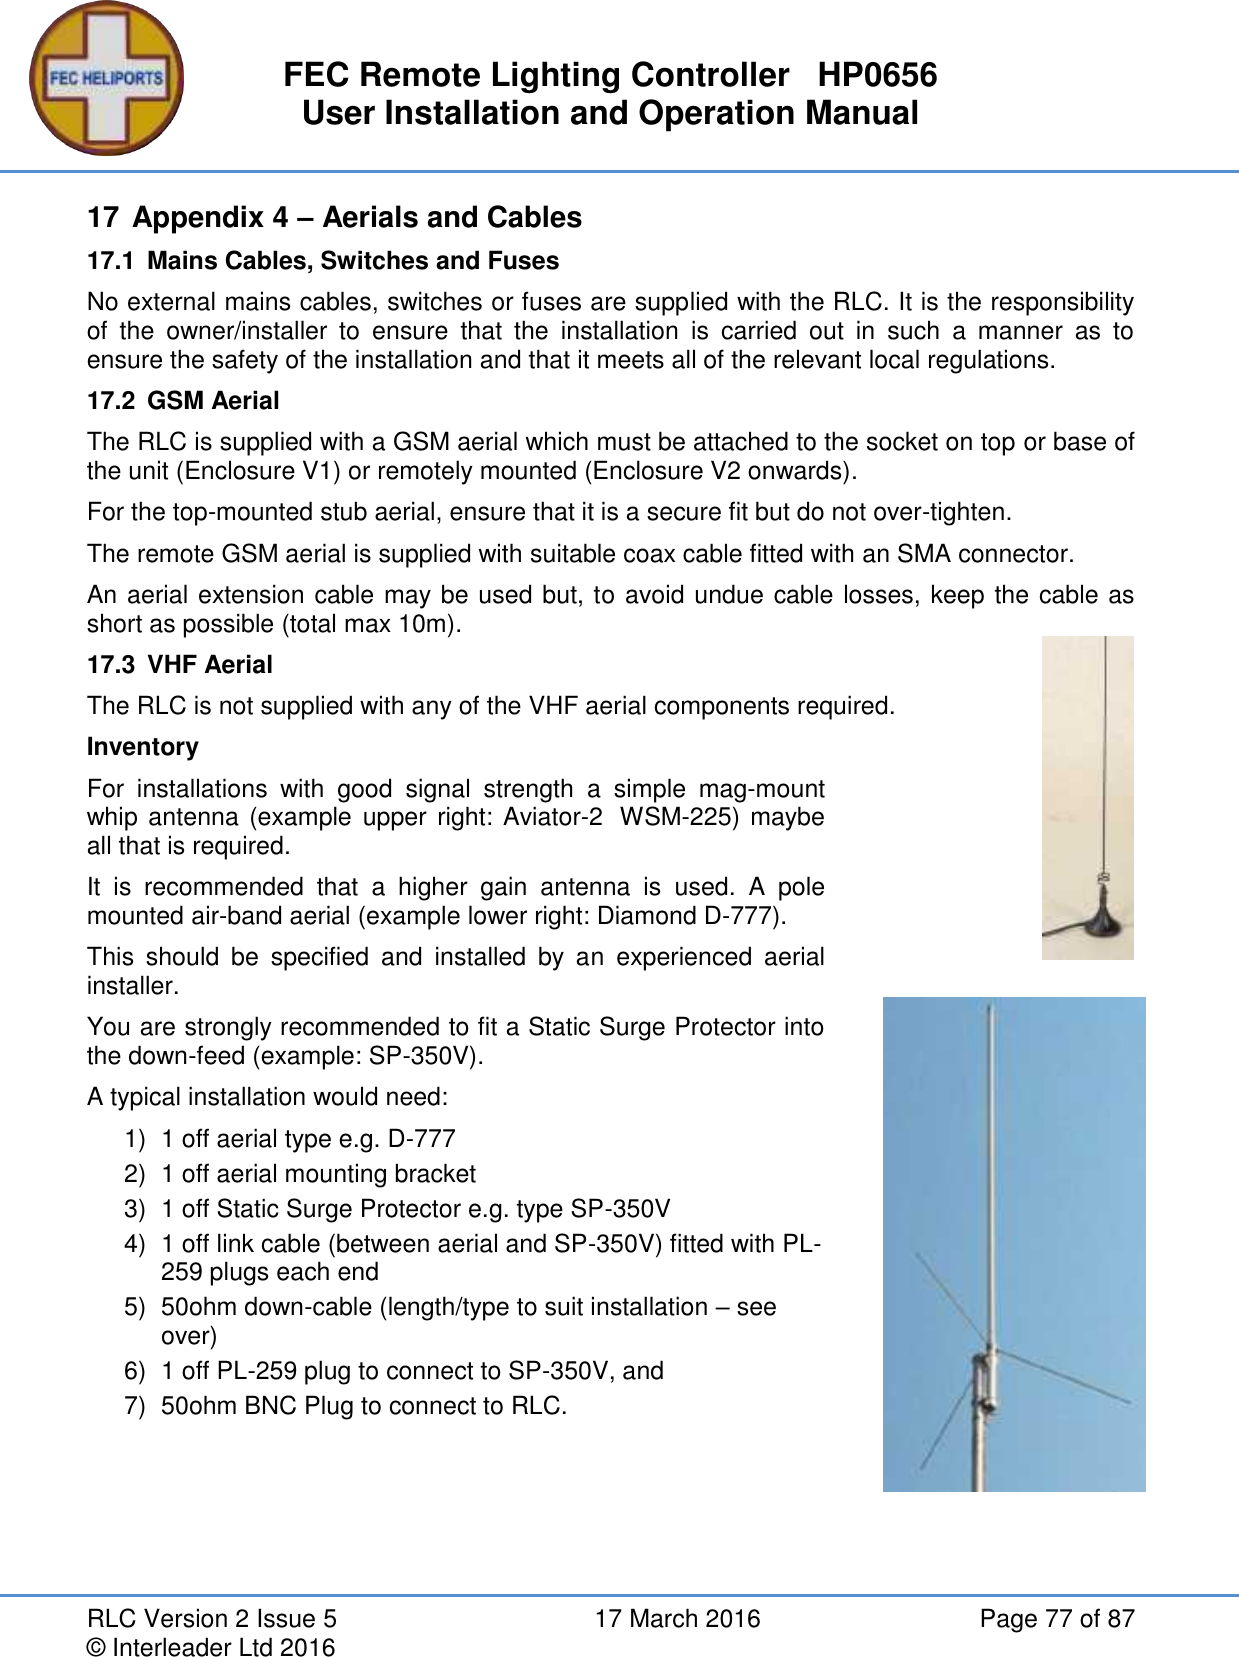 FEC Remote Lighting Controller   HP0656 User Installation and Operation Manual RLC Version 2 Issue 5  17 March 2016  Page 77 of 87 © Interleader Ltd 2016 17 Appendix 4 – Aerials and Cables 17.1  Mains Cables, Switches and Fuses No external mains cables, switches or fuses are supplied with the RLC. It is the responsibility of  the  owner/installer  to  ensure  that  the  installation  is  carried  out  in  such  a  manner  as  to ensure the safety of the installation and that it meets all of the relevant local regulations. 17.2  GSM Aerial   The RLC is supplied with a GSM aerial which must be attached to the socket on top or base of the unit (Enclosure V1) or remotely mounted (Enclosure V2 onwards). For the top-mounted stub aerial, ensure that it is a secure fit but do not over-tighten. The remote GSM aerial is supplied with suitable coax cable fitted with an SMA connector. An aerial extension cable may be used but, to avoid undue cable losses, keep the cable as short as possible (total max 10m). 17.3  VHF Aerial The RLC is not supplied with any of the VHF aerial components required. Inventory For  installations  with  good  signal  strength  a  simple  mag-mount whip antenna (example upper  right:  Aviator-2  WSM-225) maybe all that is required.  It  is  recommended  that  a  higher  gain  antenna  is  used.  A  pole mounted air-band aerial (example lower right: Diamond D-777). This  should  be  specified  and  installed  by  an  experienced  aerial installer. You are strongly recommended to fit a Static Surge Protector into the down-feed (example: SP-350V). A typical installation would need: 1)  1 off aerial type e.g. D-777 2)  1 off aerial mounting bracket 3)  1 off Static Surge Protector e.g. type SP-350V 4)  1 off link cable (between aerial and SP-350V) fitted with PL-259 plugs each end  5)  50ohm down-cable (length/type to suit installation – see over) 6)  1 off PL-259 plug to connect to SP-350V, and 7)  50ohm BNC Plug to connect to RLC.    